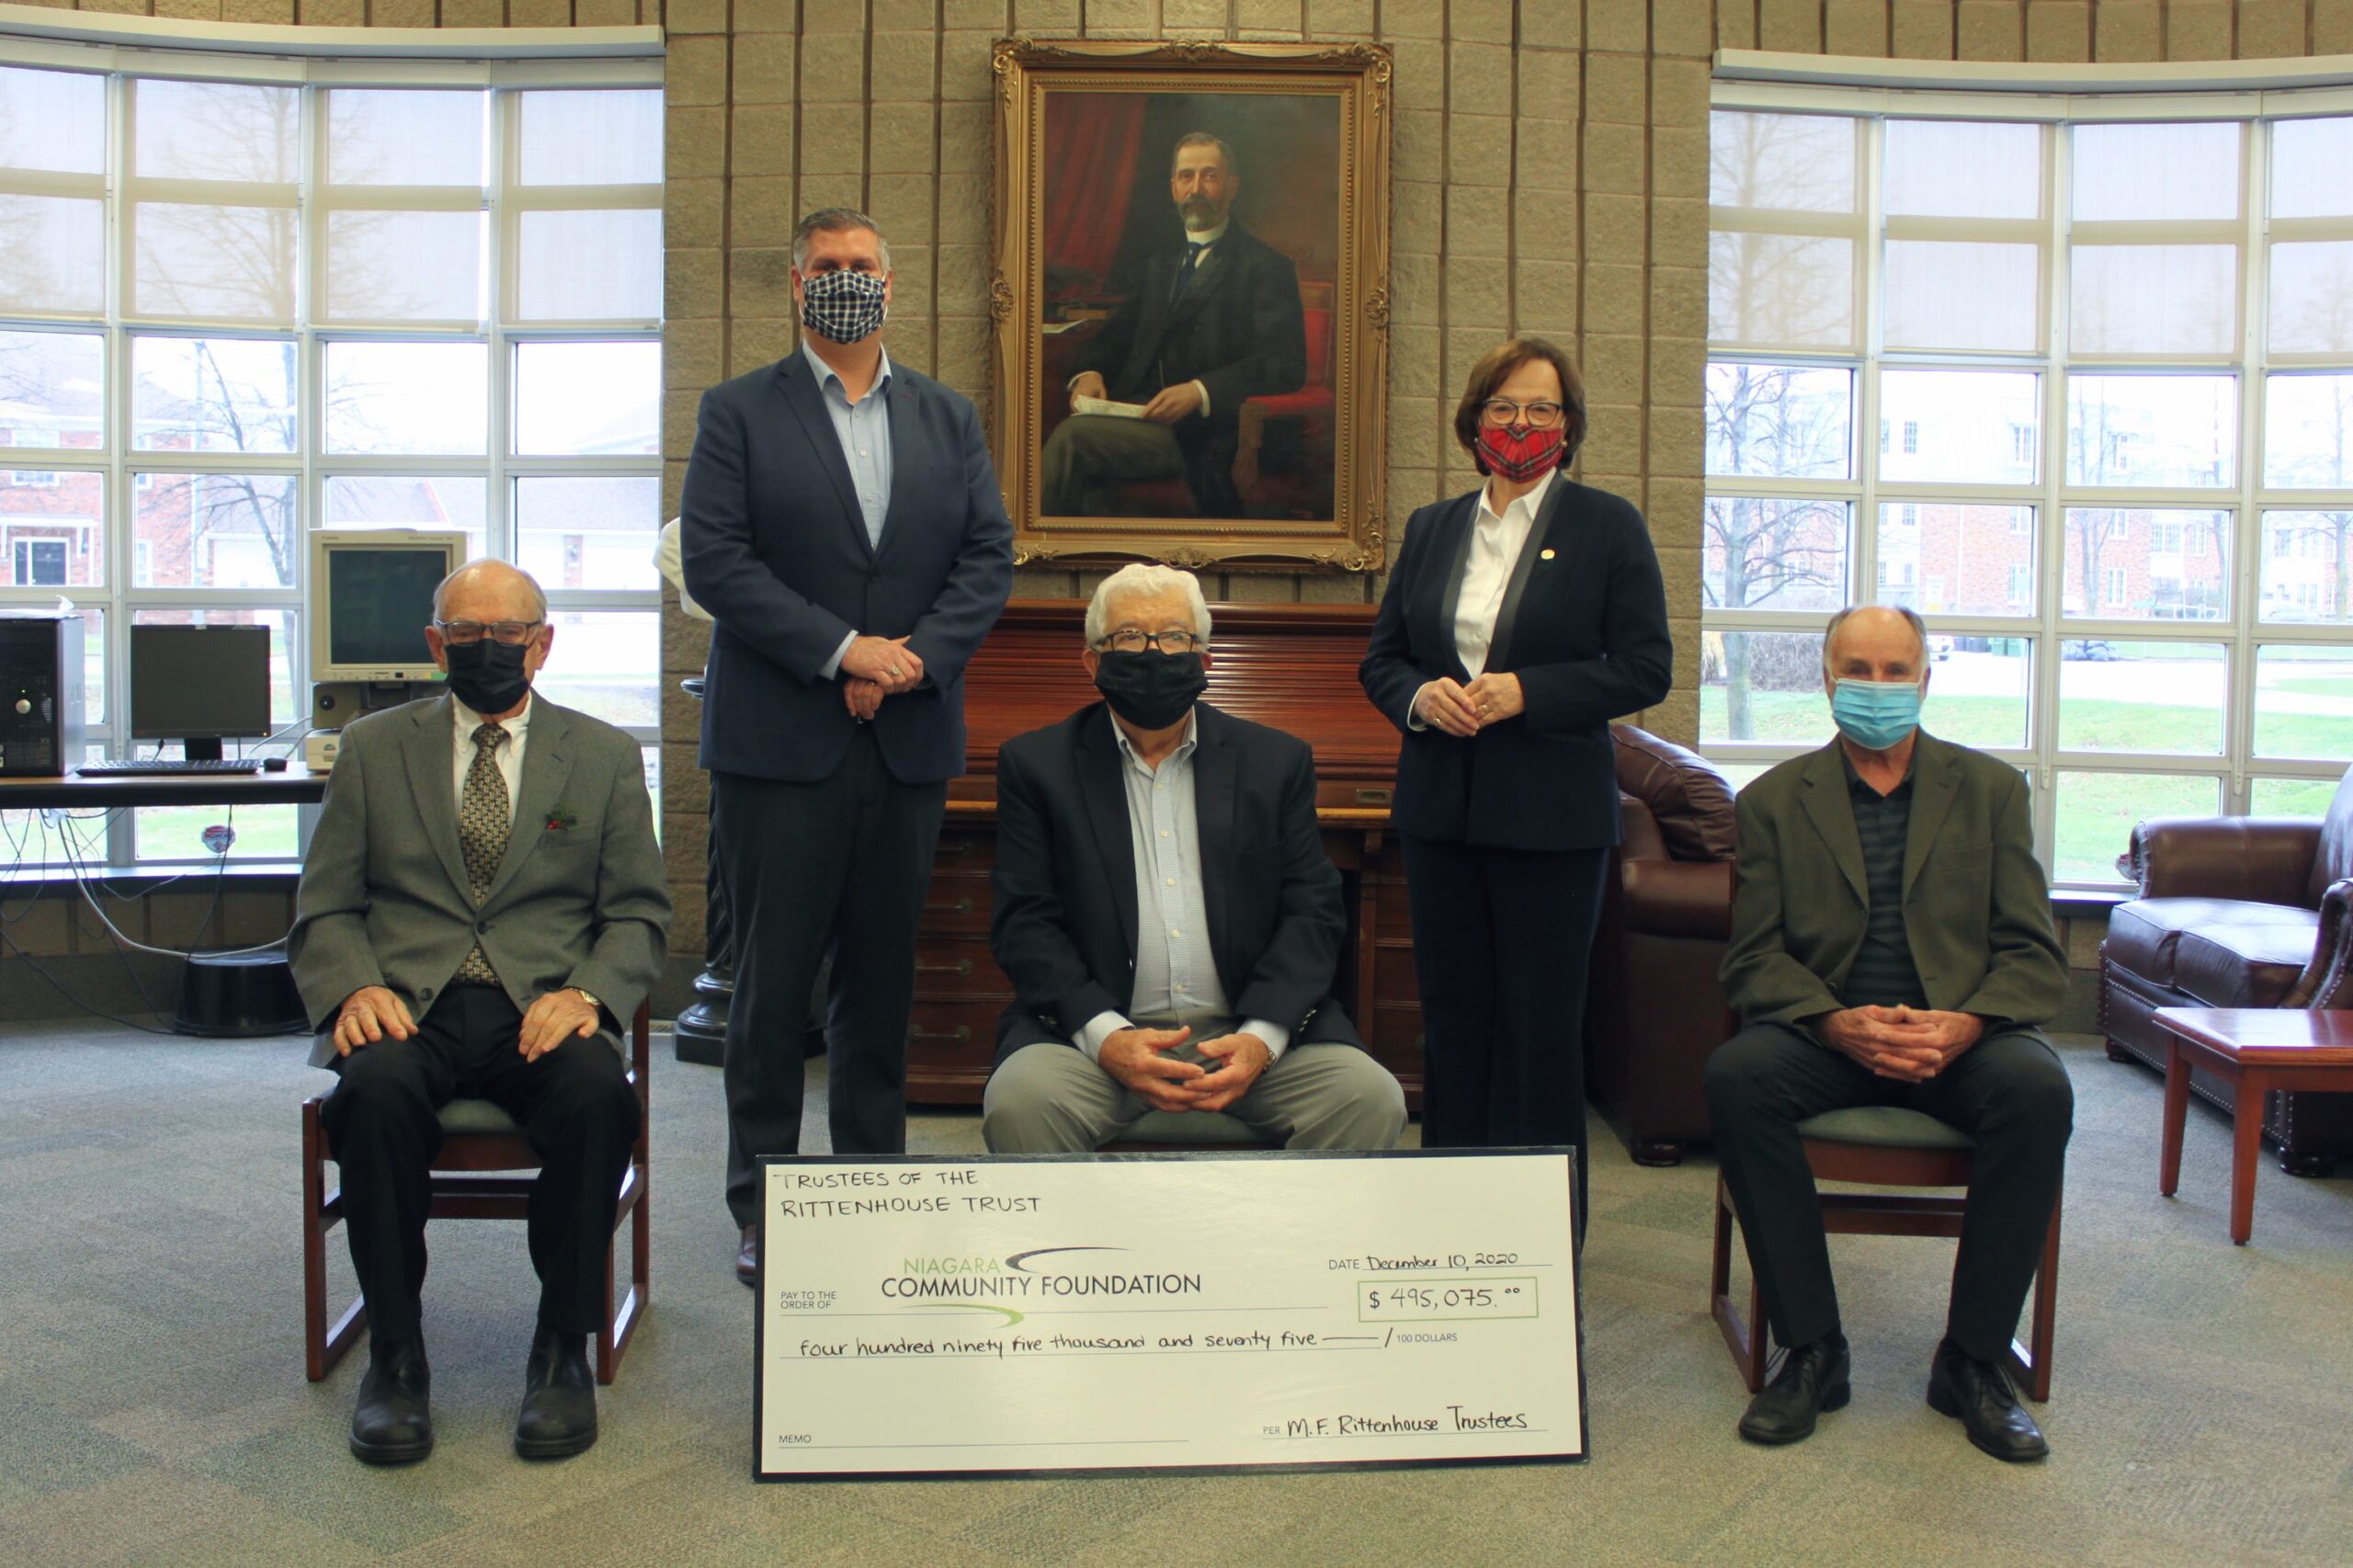 Niagara Community Foundation continues the work of the Rittenhouse Legacy